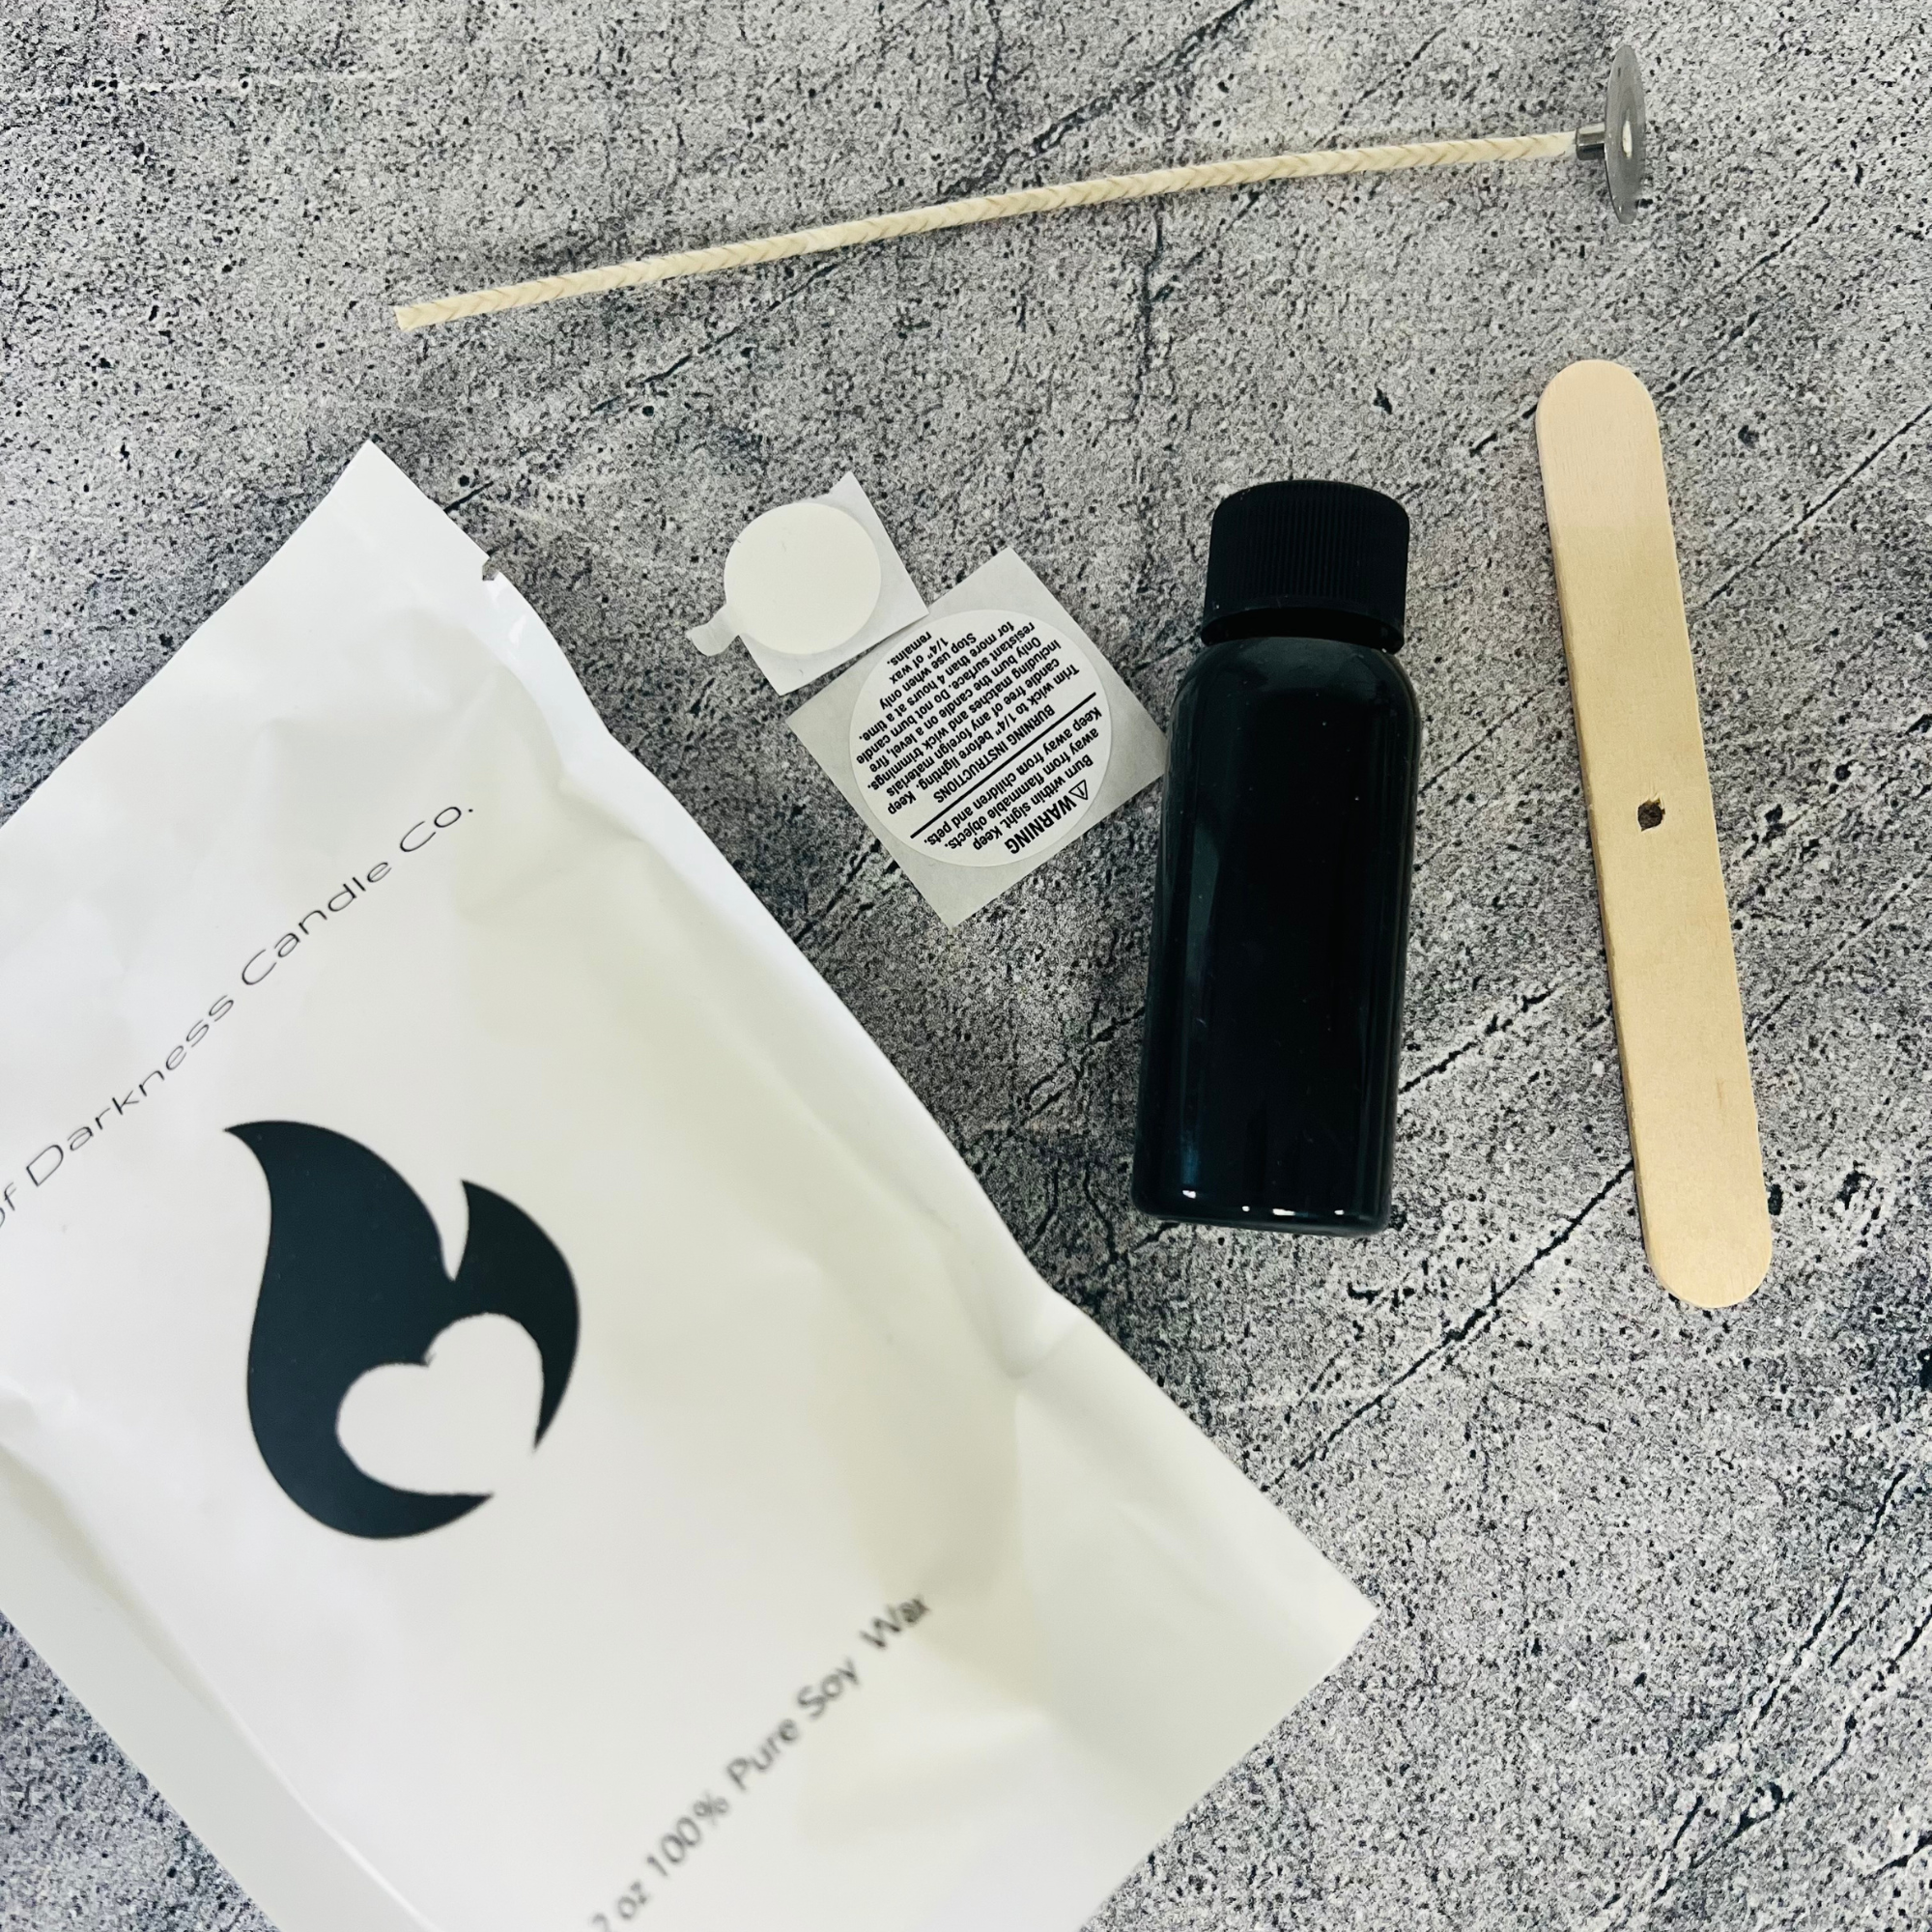 Cotton Wick, Wooden Wick Holder, Warning Label, Wick Sticker, Black Bottle with top and White Bag with Black Flame Logo on front laid out on a gray table